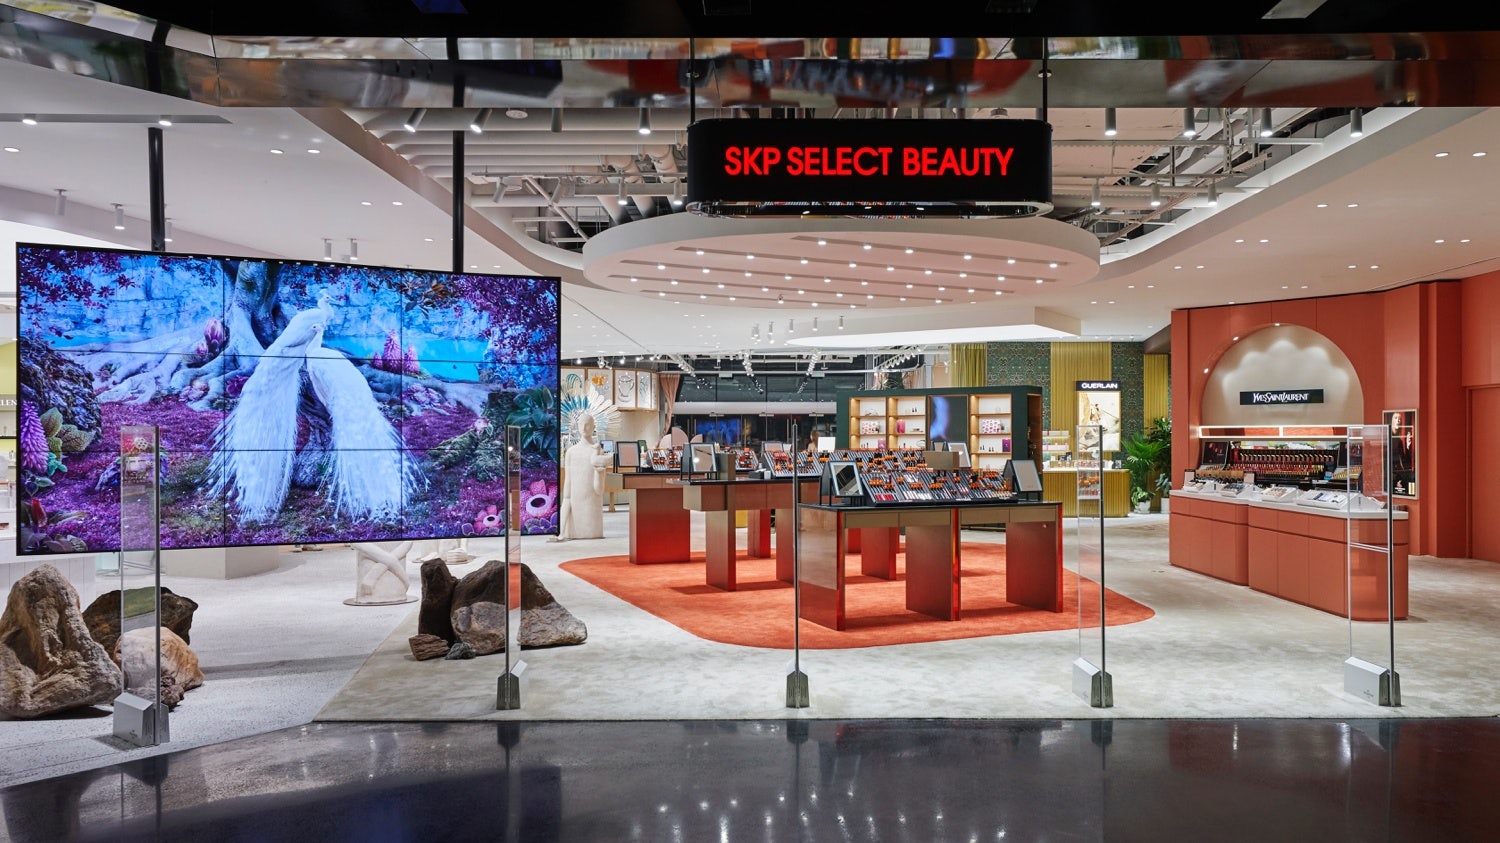 Beijing SKP achieved double-digit sales growth in 2020, though its offline retail was disrupted by the COVID-19 pandemic. Photo: Courtesy of Gentle Monster.